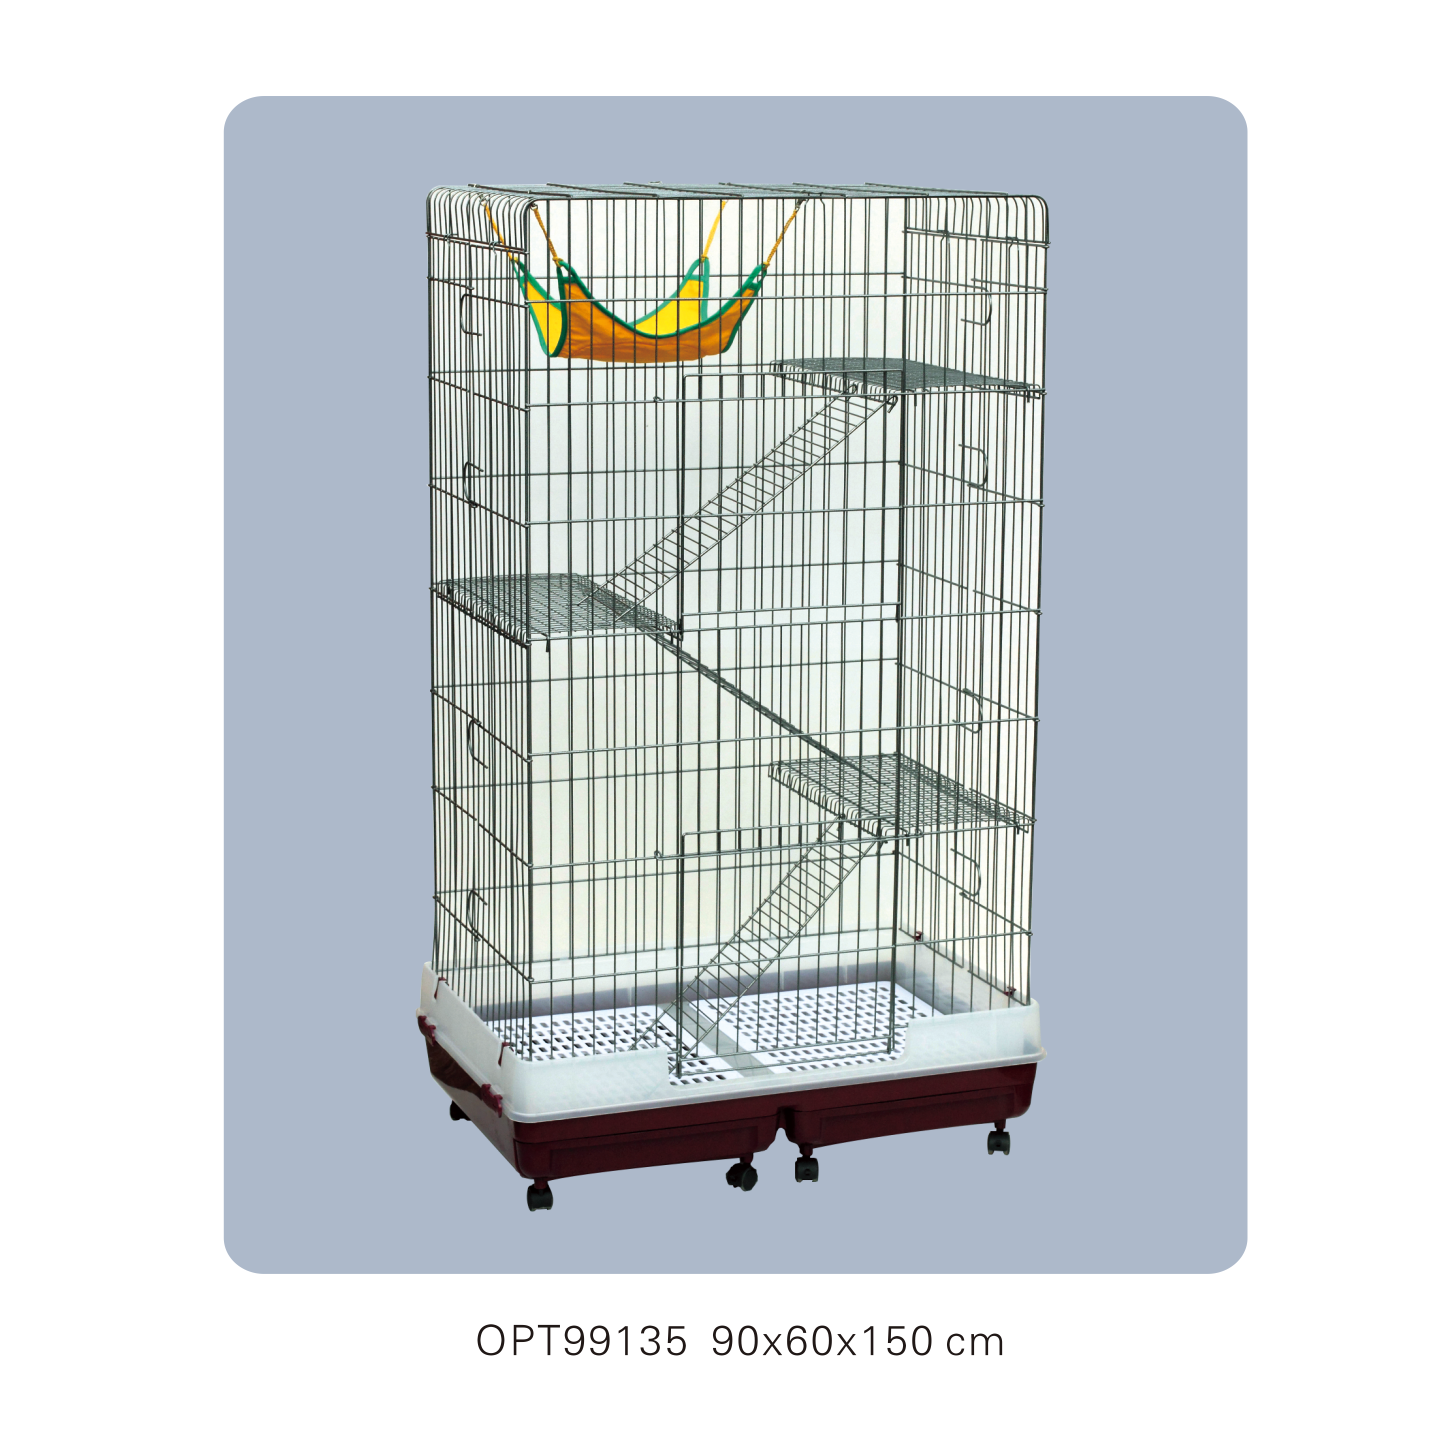 OPT99135 90x60x150cm small animal cages